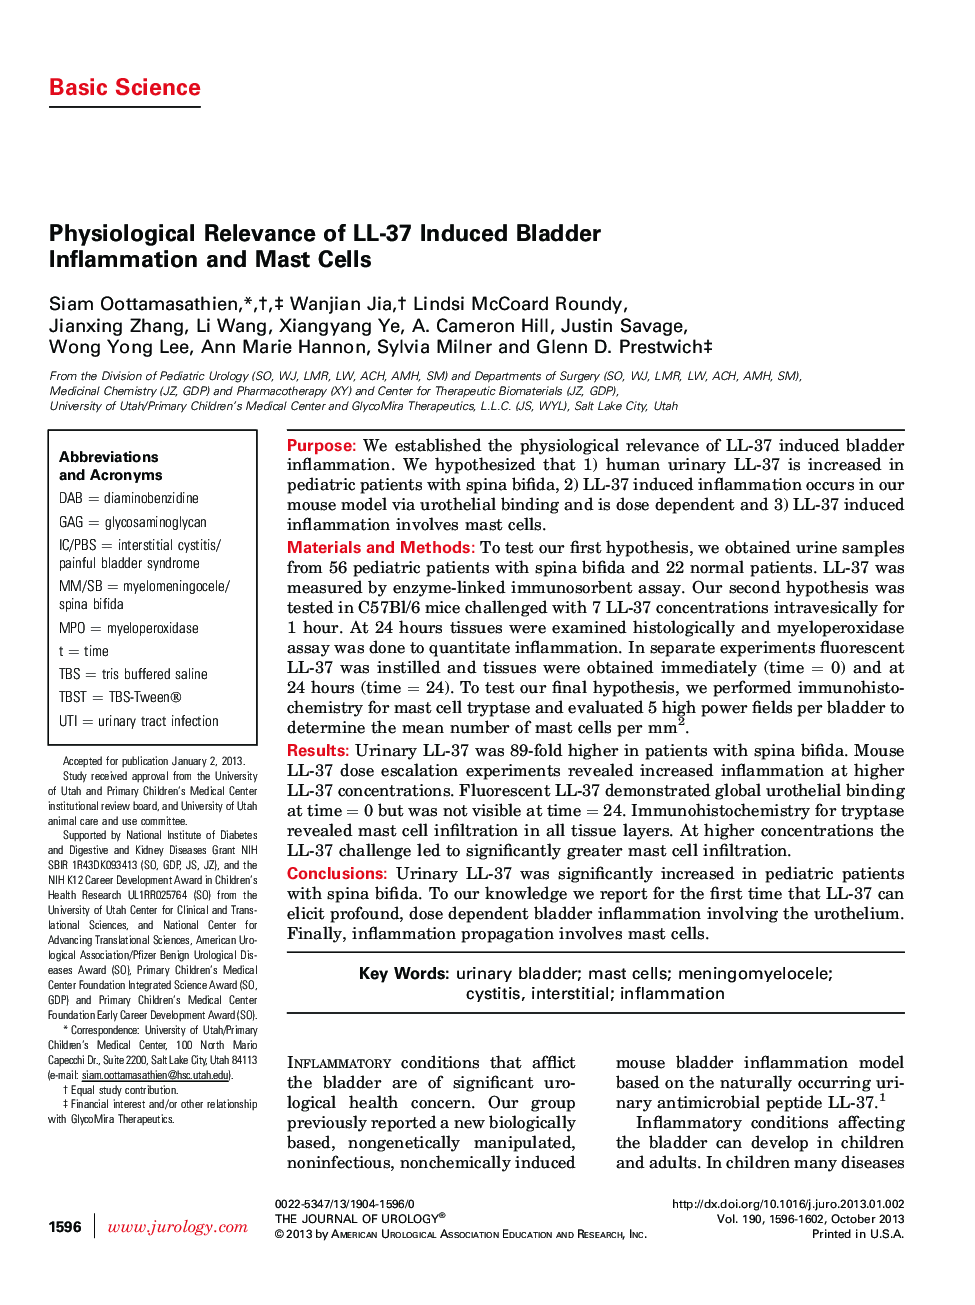 Physiological Relevance of LL-37 Induced Bladder Inflammation and Mast Cells 